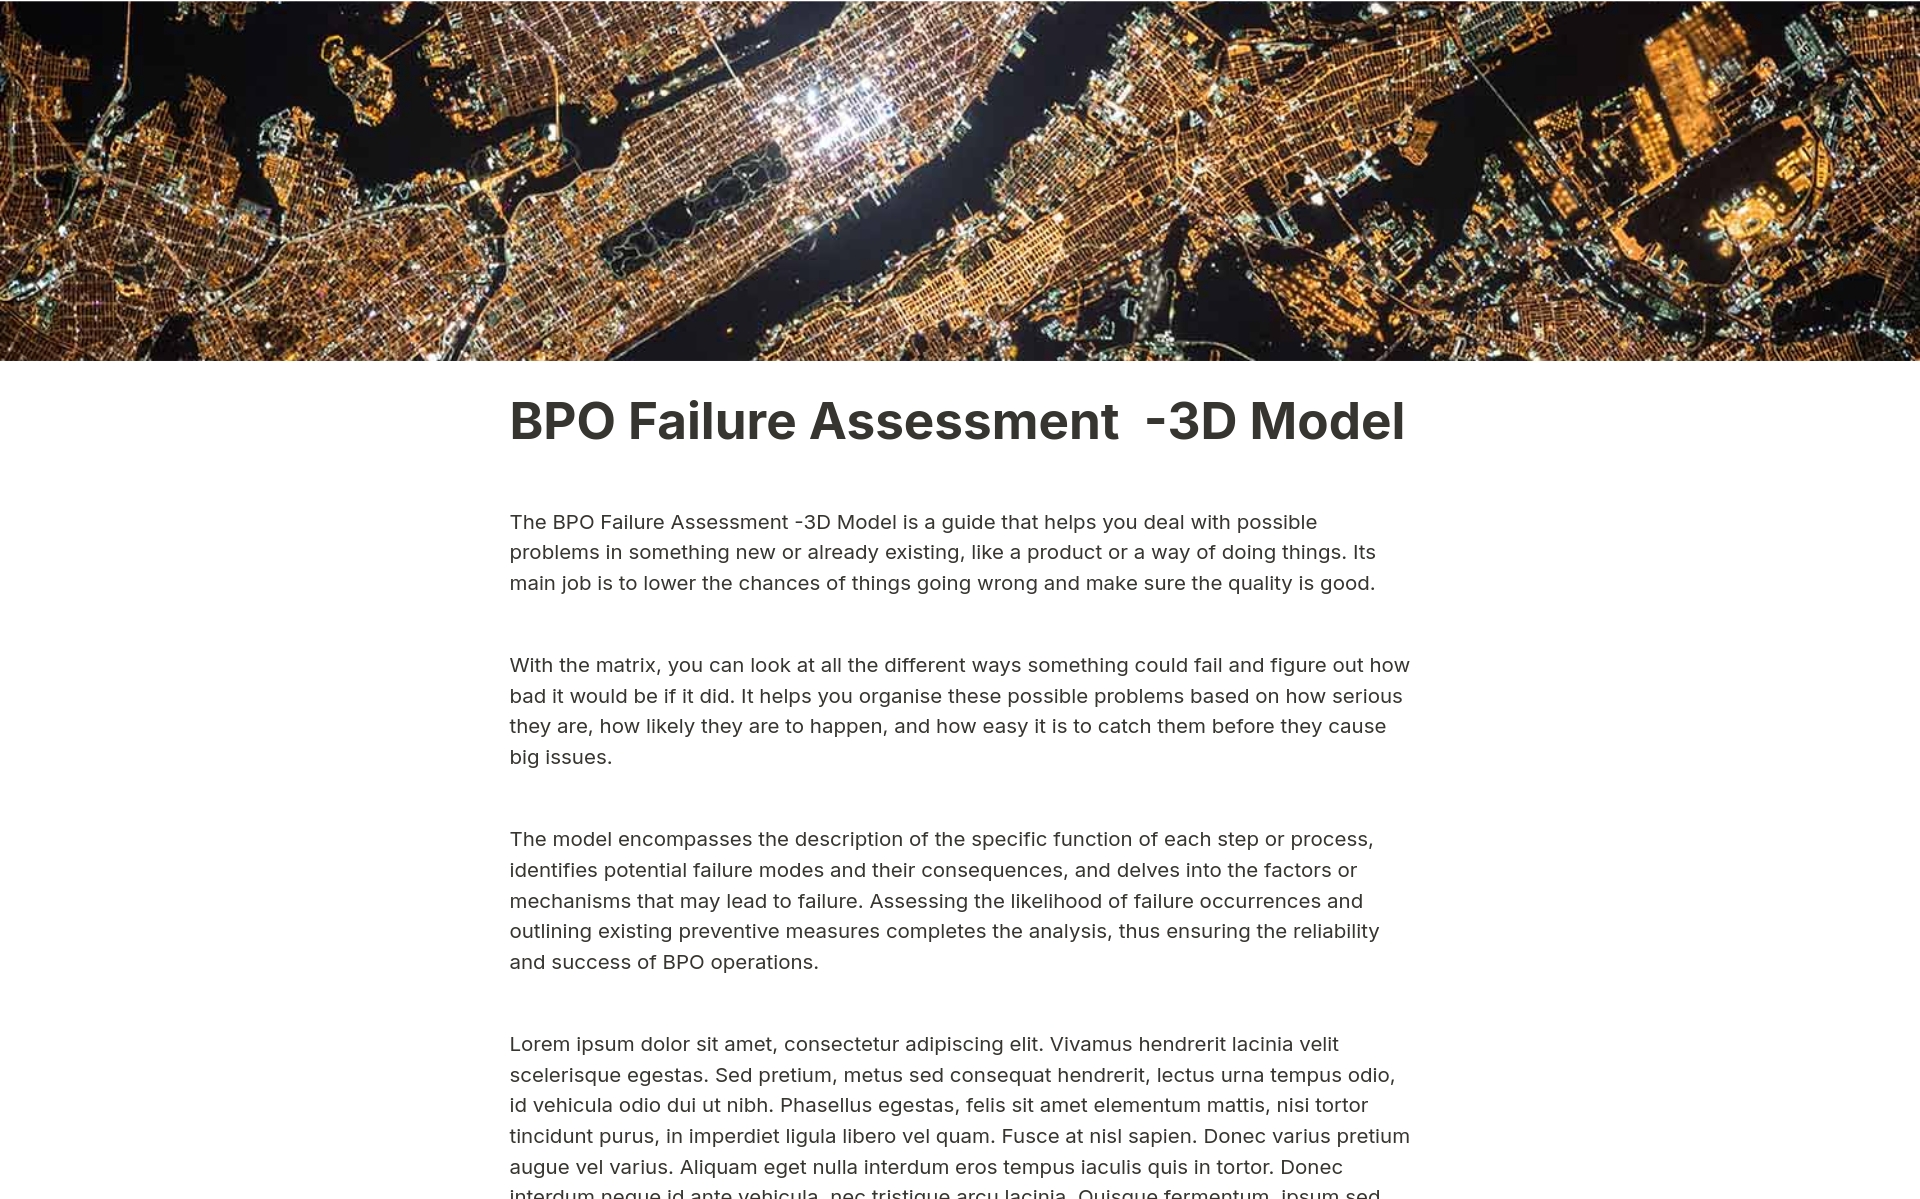 This 3D Model serves as a tool to address potential issues in new or existing products or processes, aiming to minimise the likelihood of failures and ensure high quality.